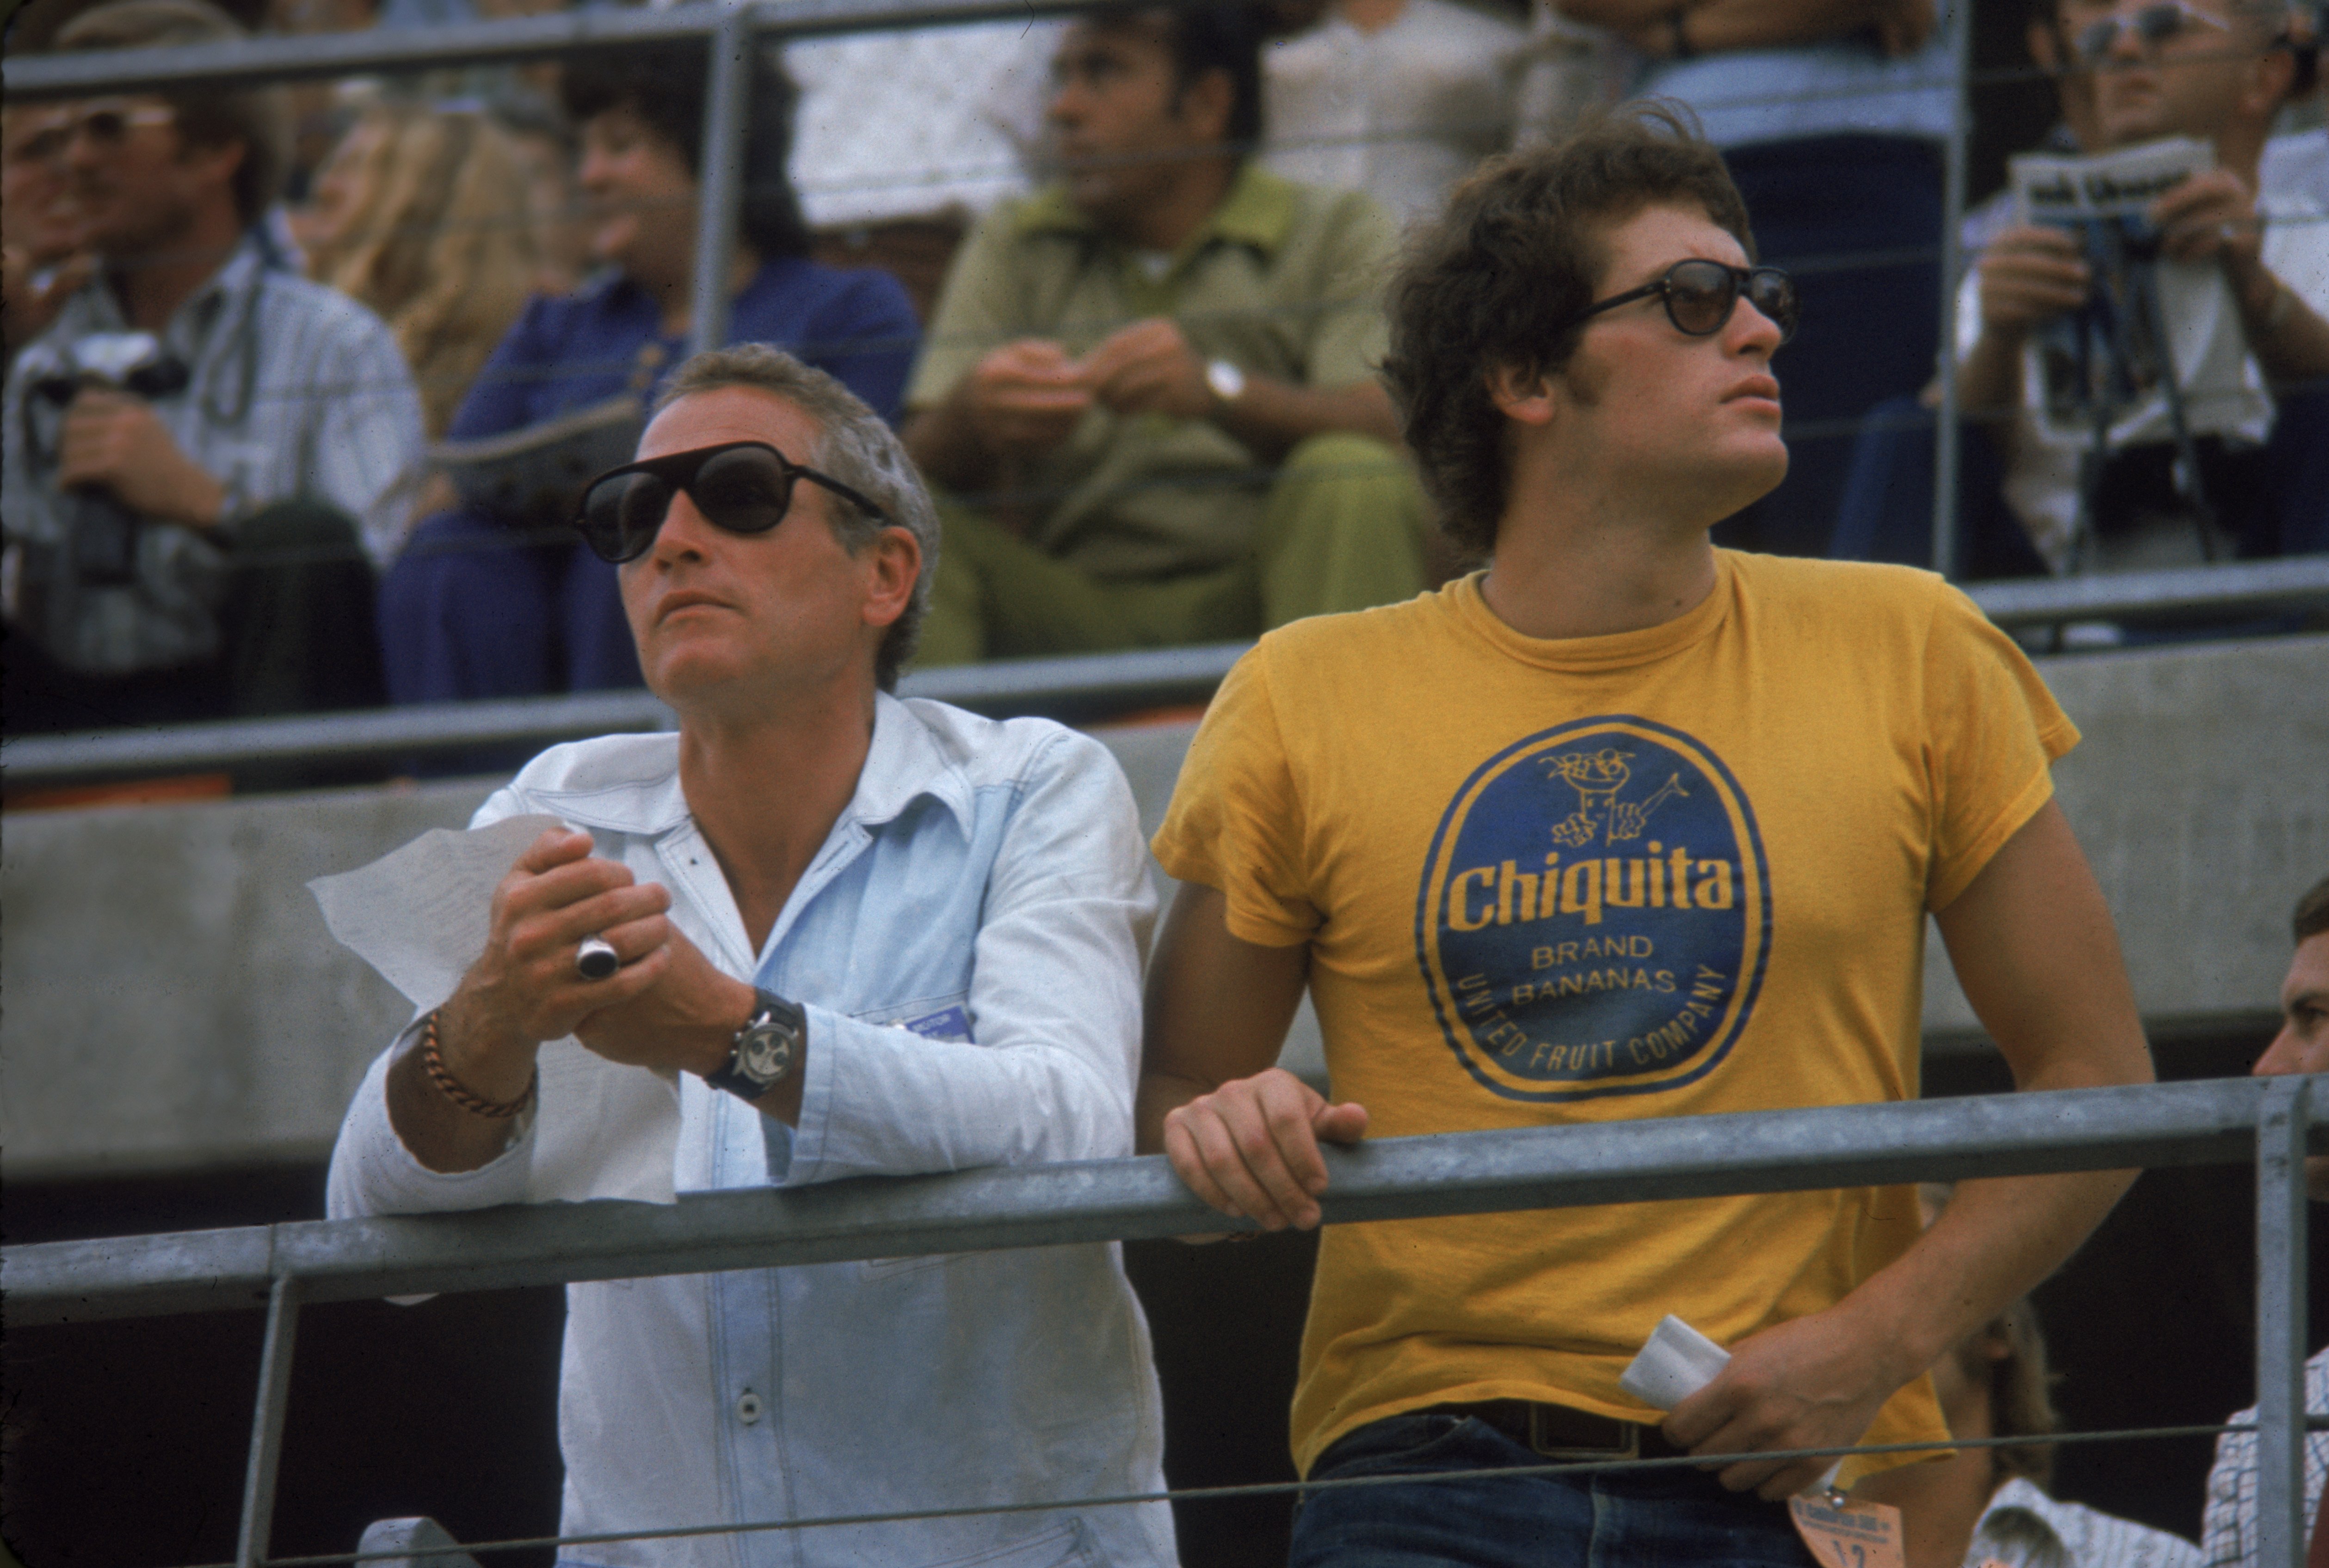 Paul Newman and his son Scott Newman during the Ontario 500 automobile race on September 3, 1972 in Ontario, California. / Source: Getty Images